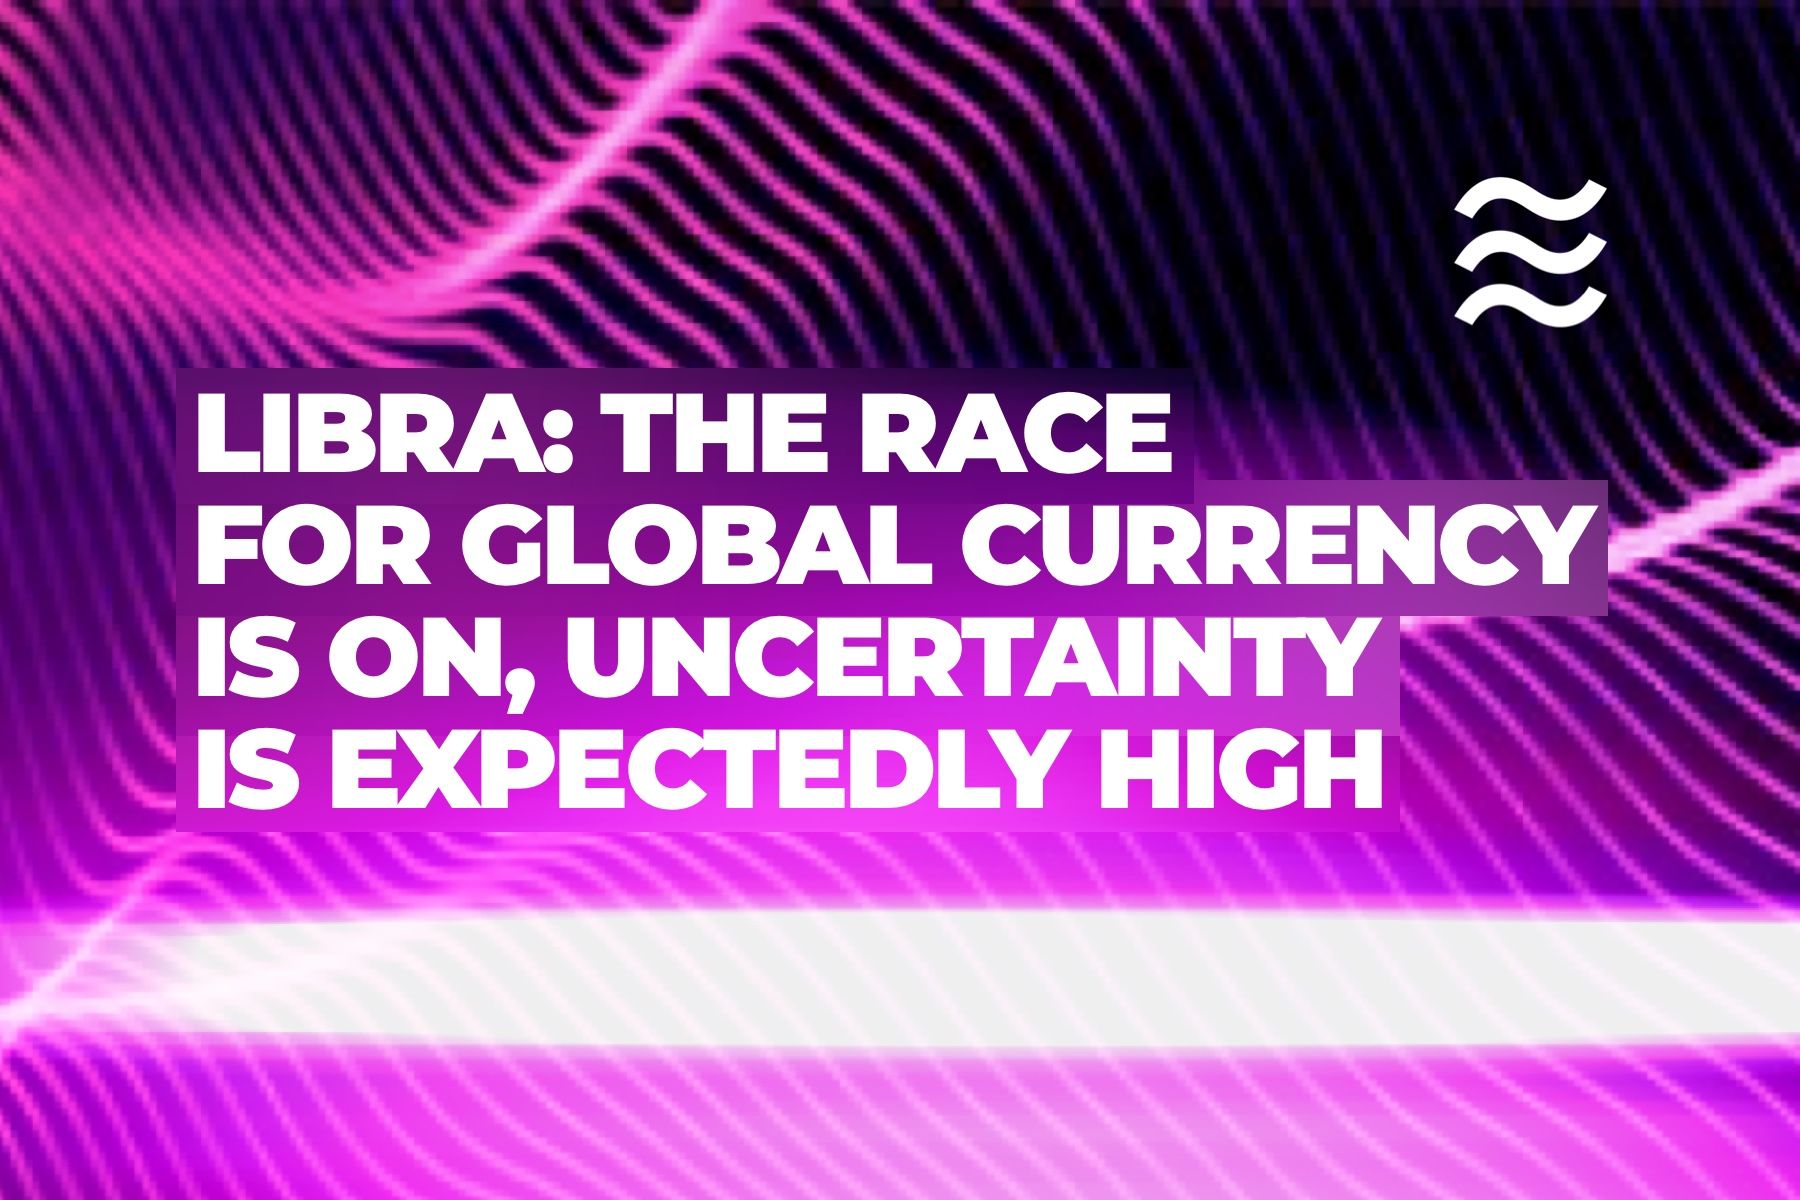 Report. Libra: the race for a global currency is on, uncertainty is high